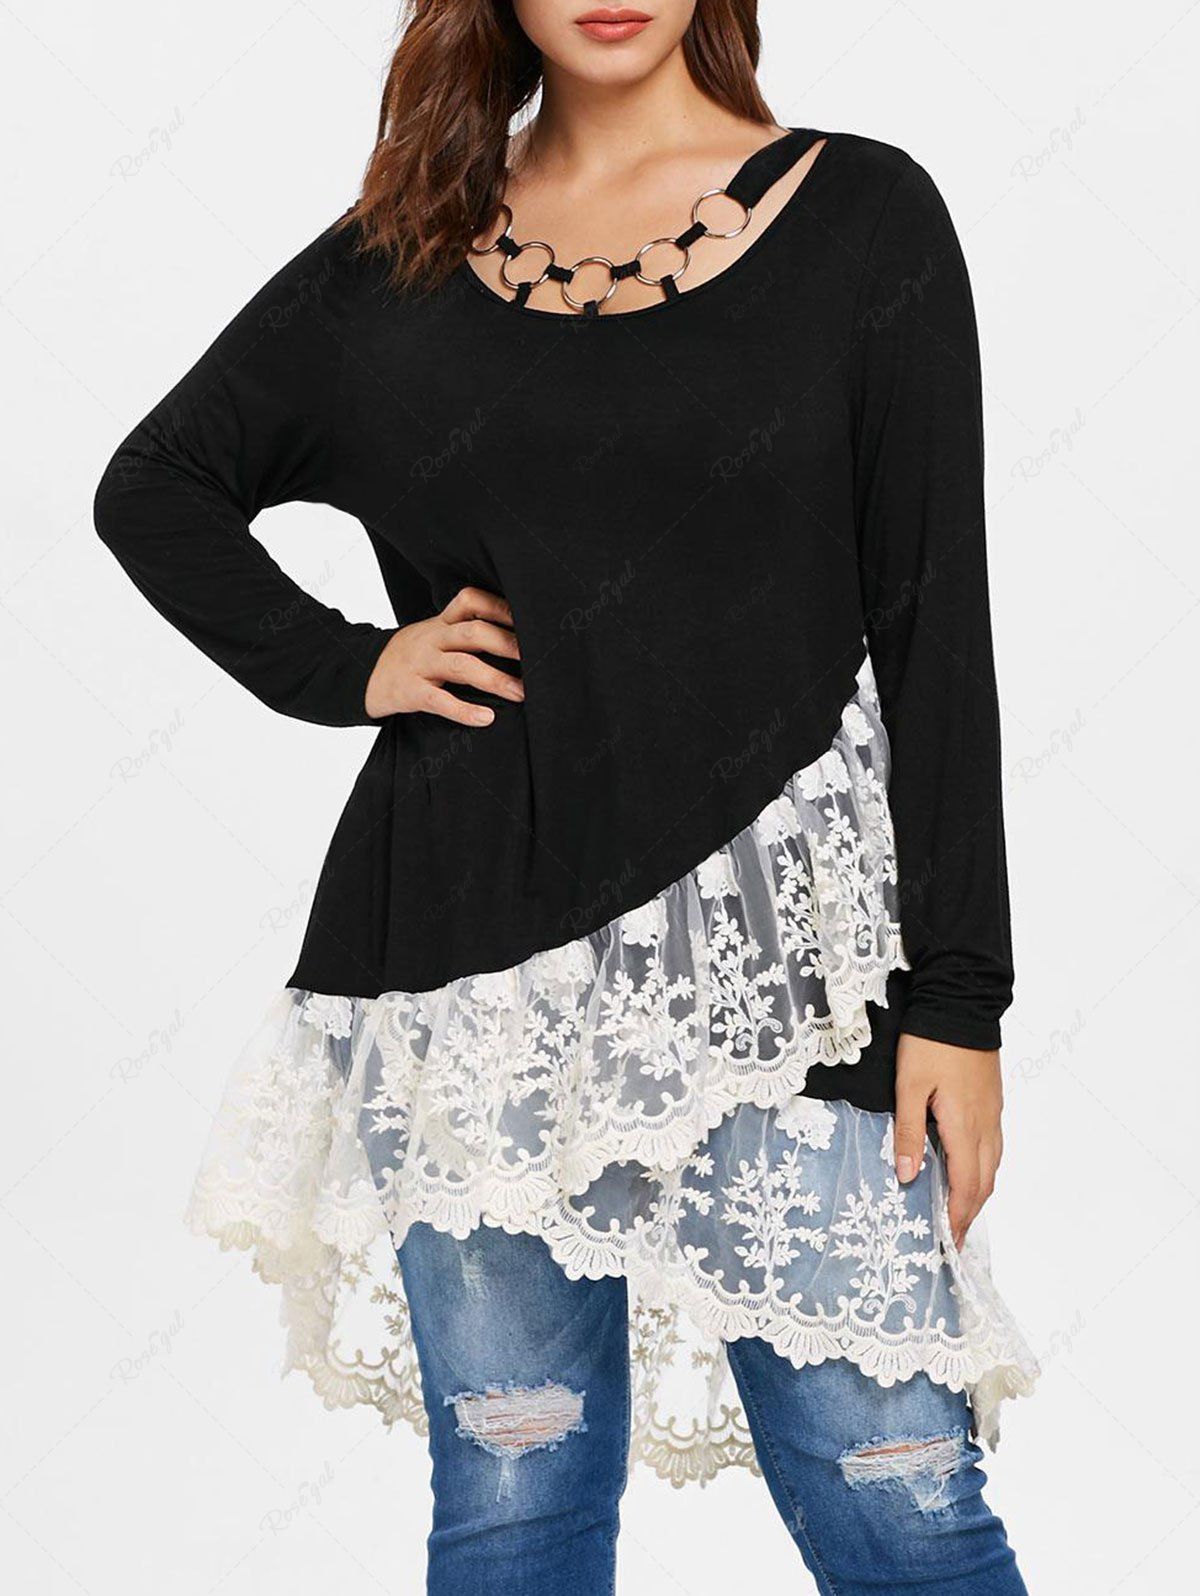 Discount Plus Size O-ring Panel Tulip Hem Floral Lace Trim Layered Tunic T-shirt  